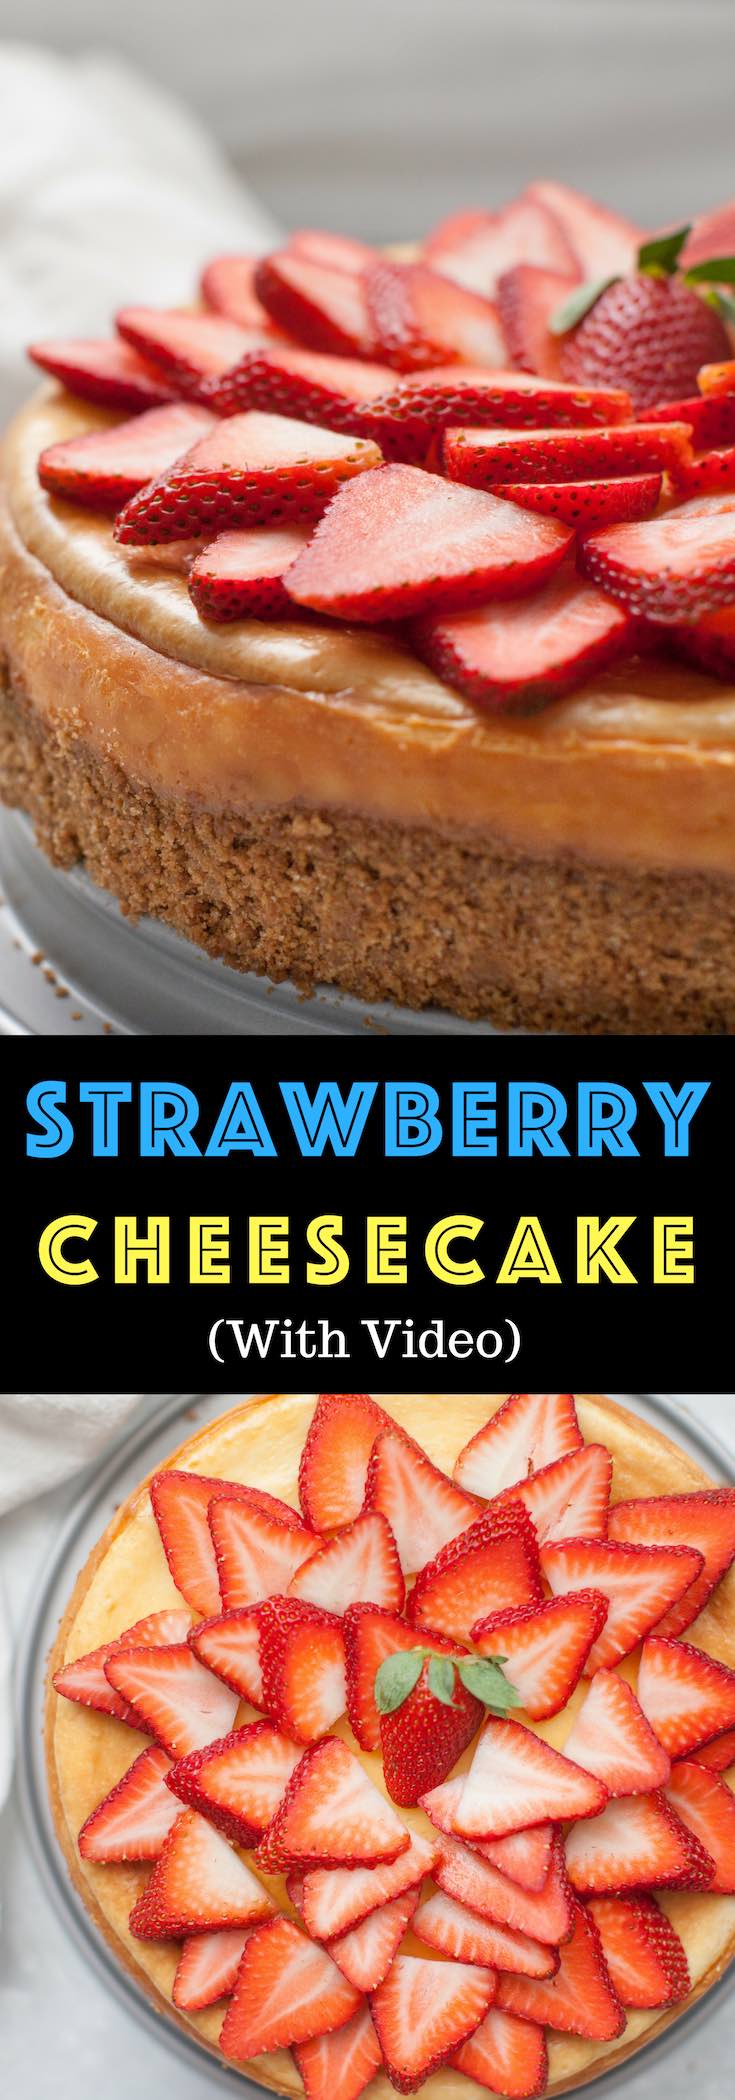 Strawberry White Chocolate Cheesecake is a fluffy baked cheesecake with a graham cracker crust and fresh strawberries on top. The perfect melt-in-your-mouth dessert for holidays including Easter, Mother's Day, Father's Day, Thanksgiving and Christmas as well as parties, potlucks and birthdays! Made with Happy Eggs from @happyeggcousa #healthyhappyeggs #organic #AD